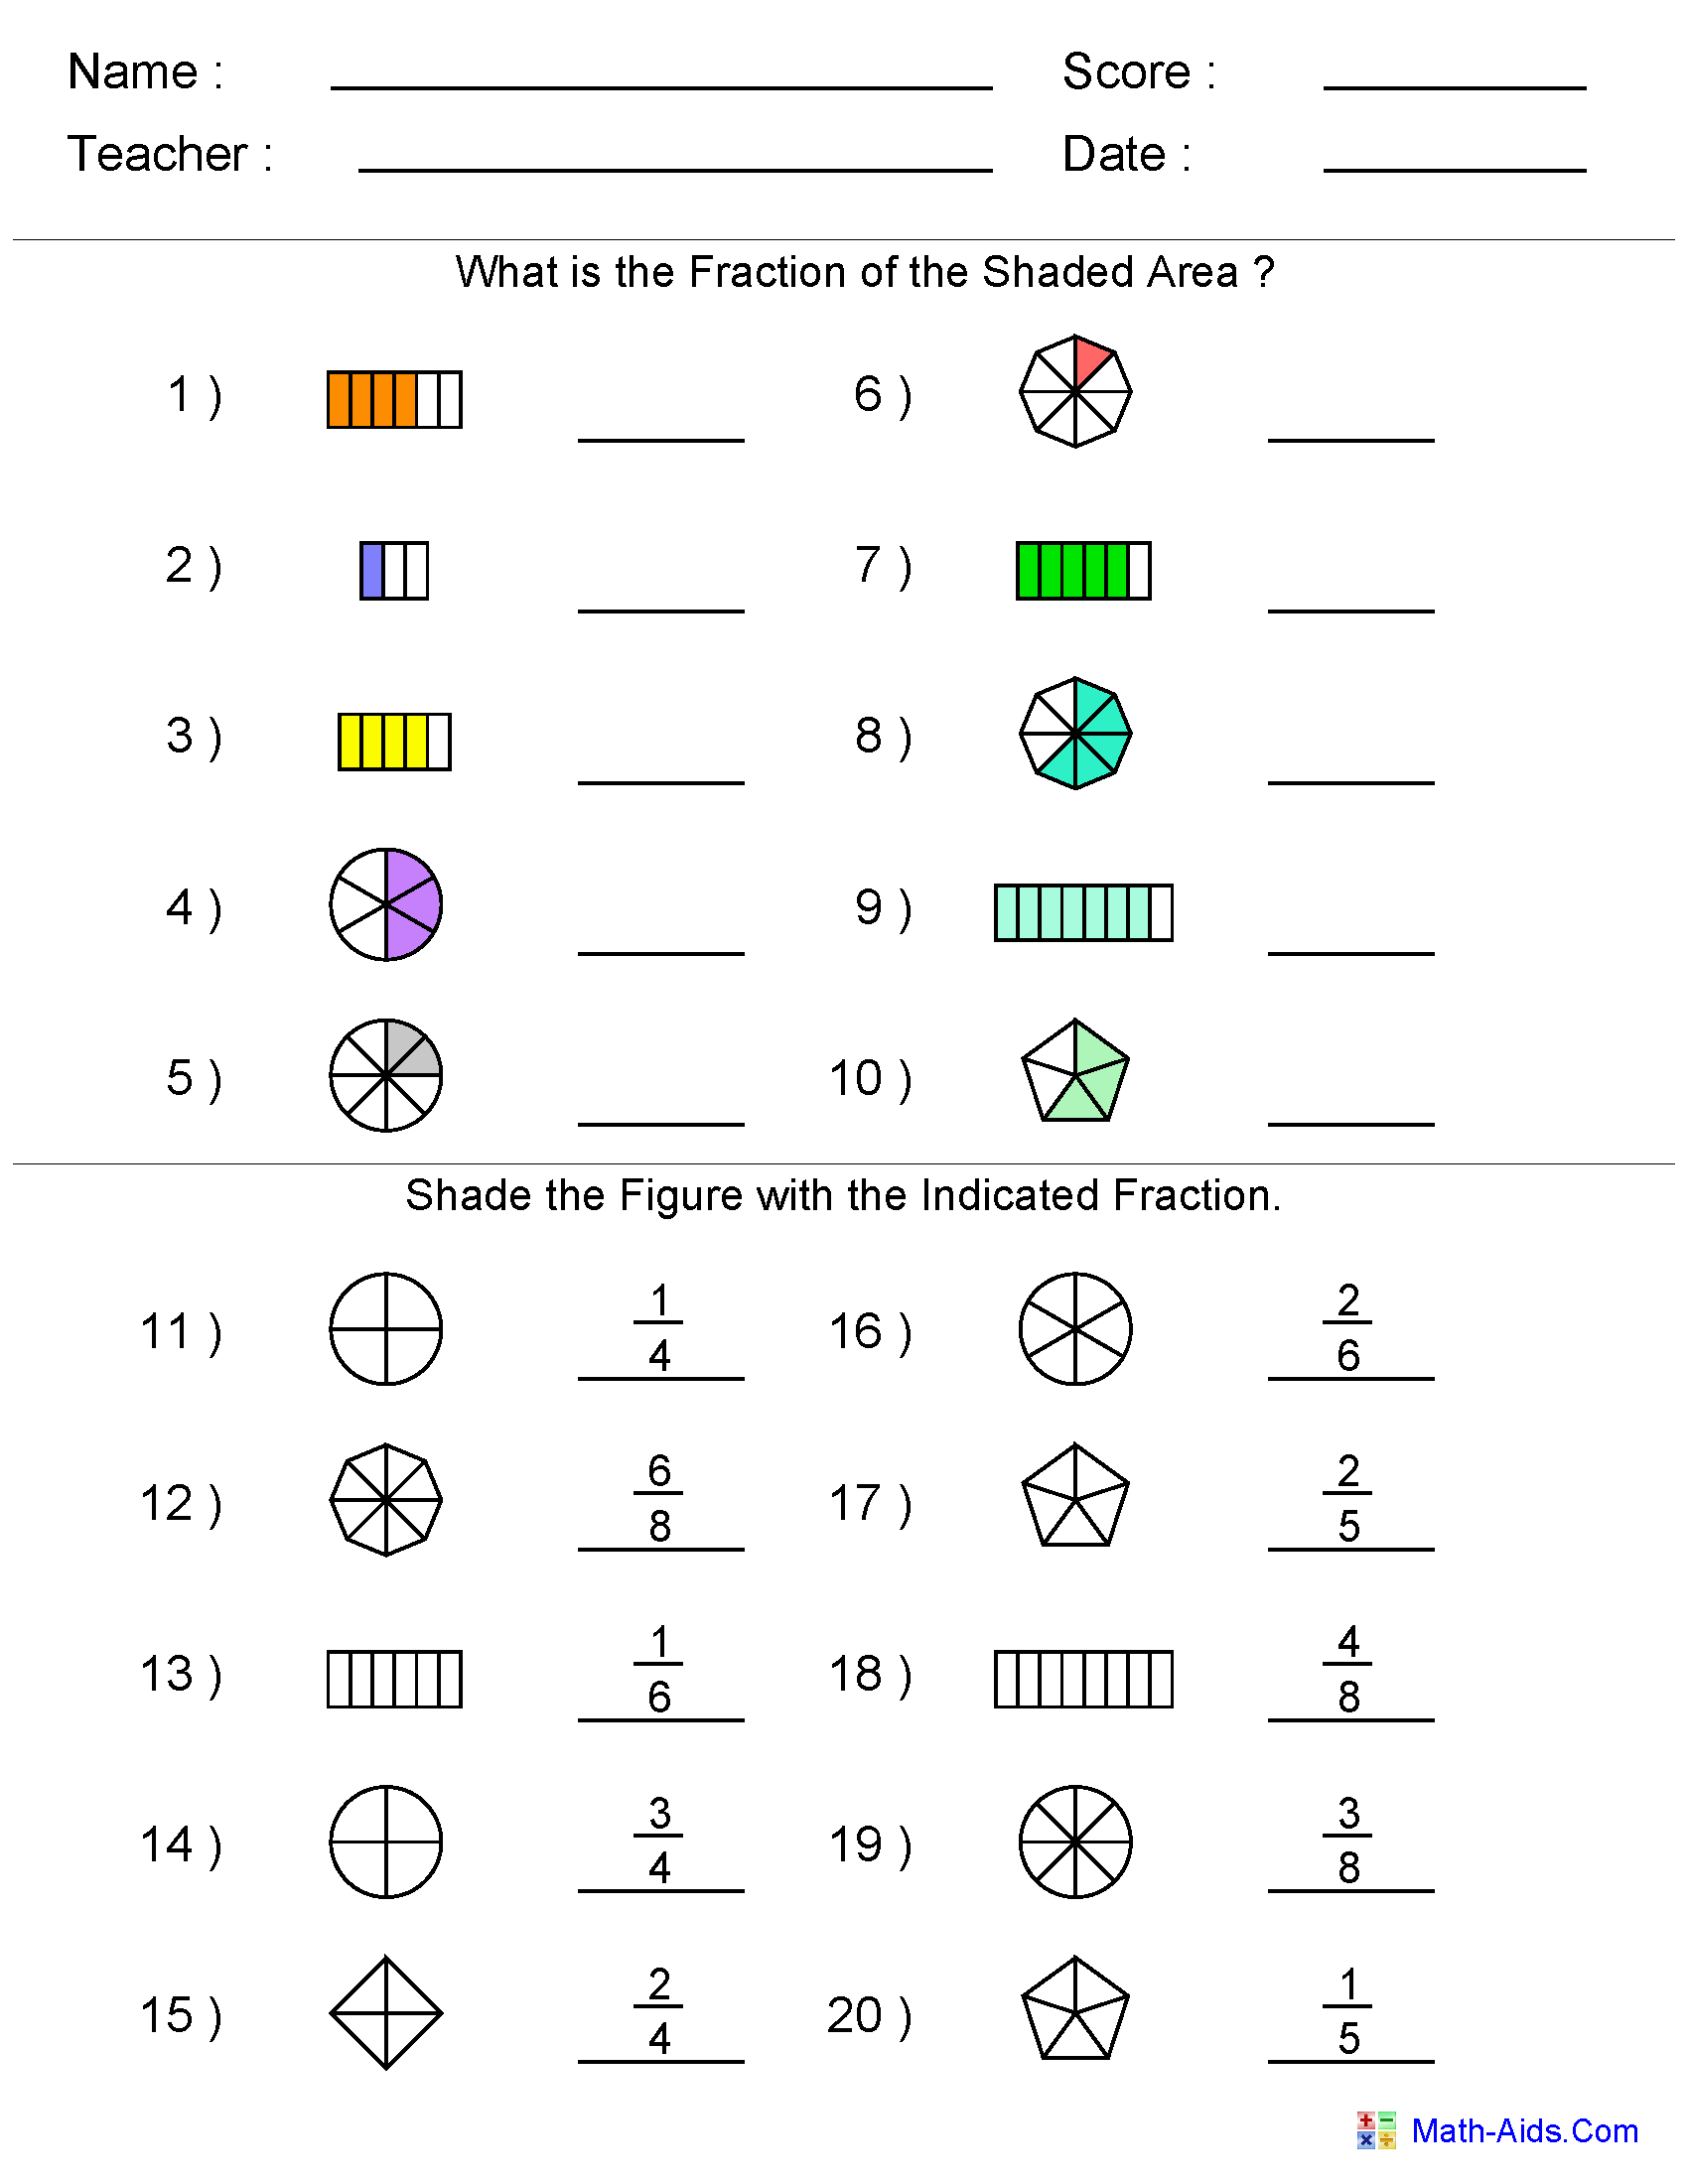 Comparing Fractions Worksheets 3Rd Grade math school School s Free Printable First 